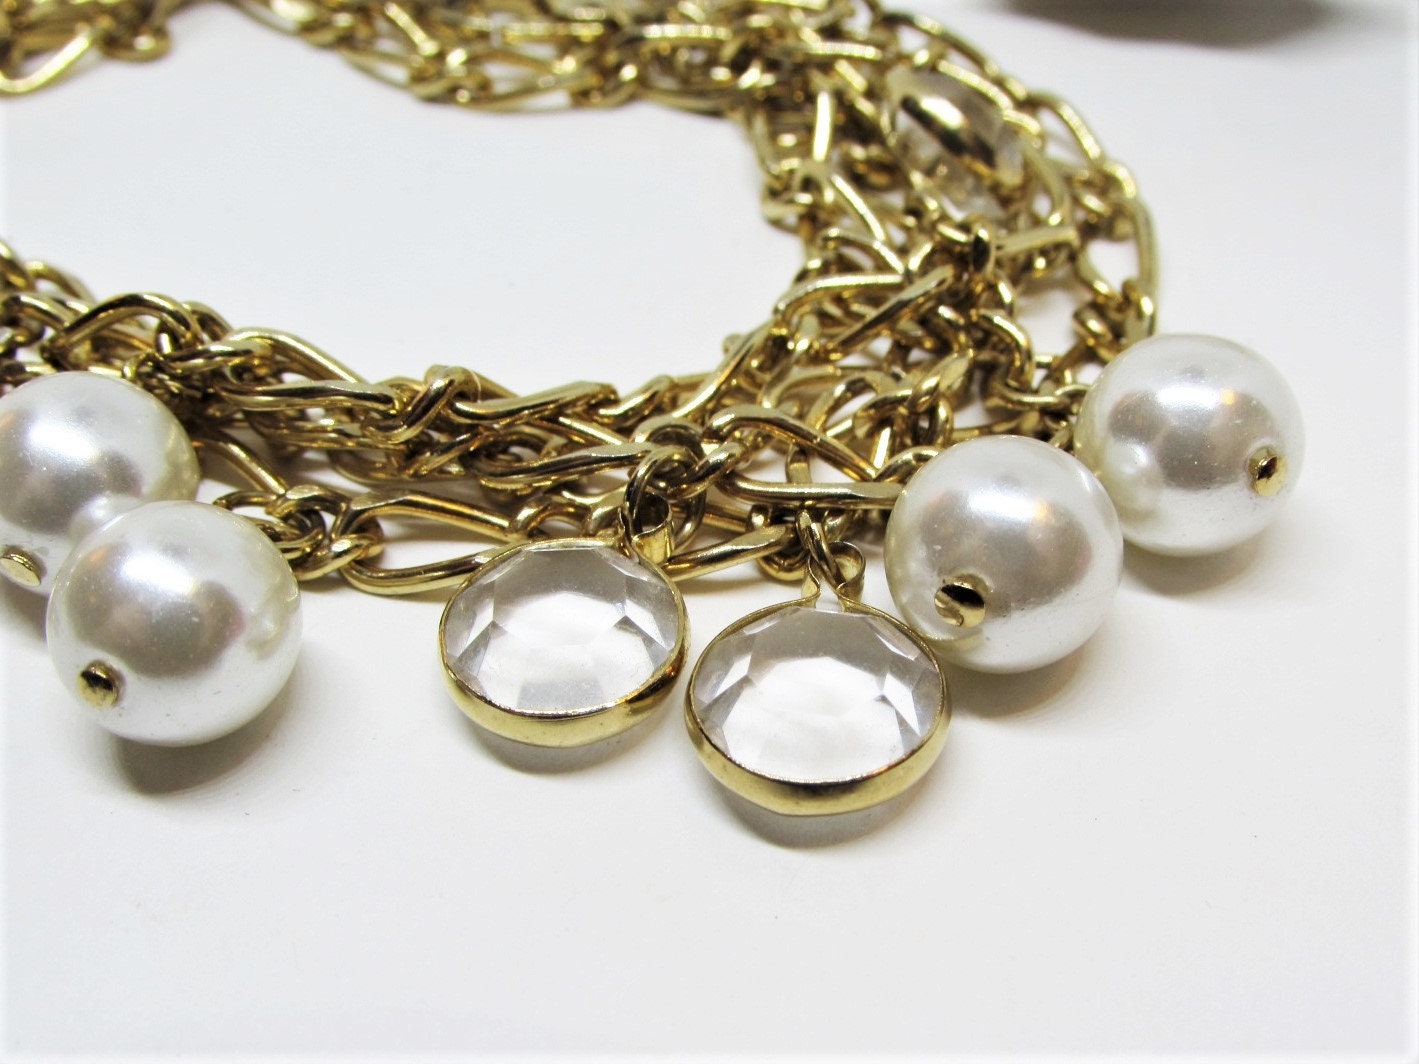 RedGarnetVintage Vintage Long Faux Pearl & Clear Bezel Set Crystal Necklace, Dangle Charms, Chunky Gold Plated Oval Link Chain, 1980s Statement Jewelry